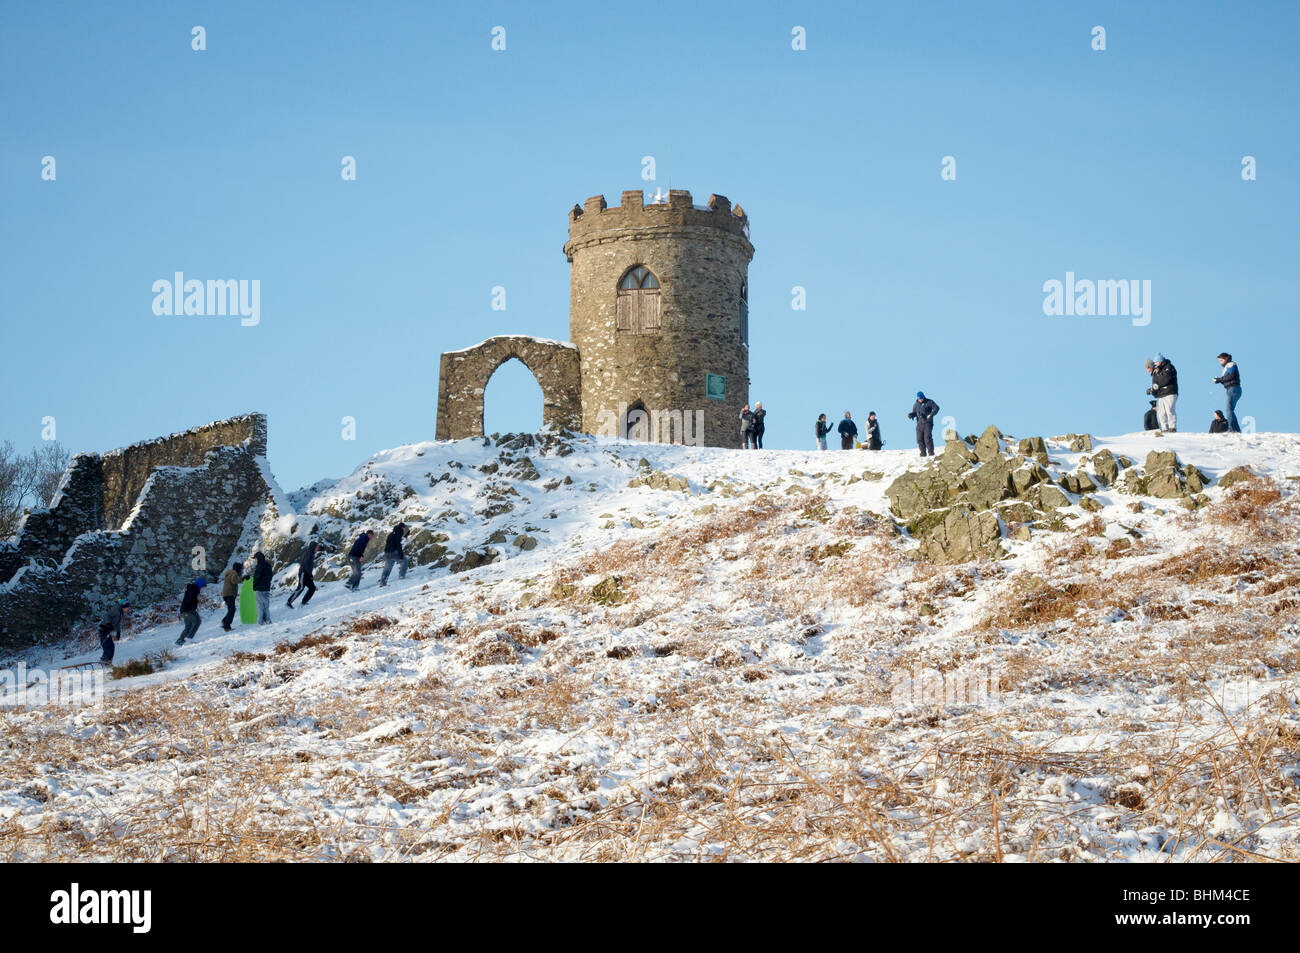 Snowy Winter Scene at Old John, Bradgate Park, Newtown Linford, Leicestershire. People having fun, sledging downhill. Stock Photo